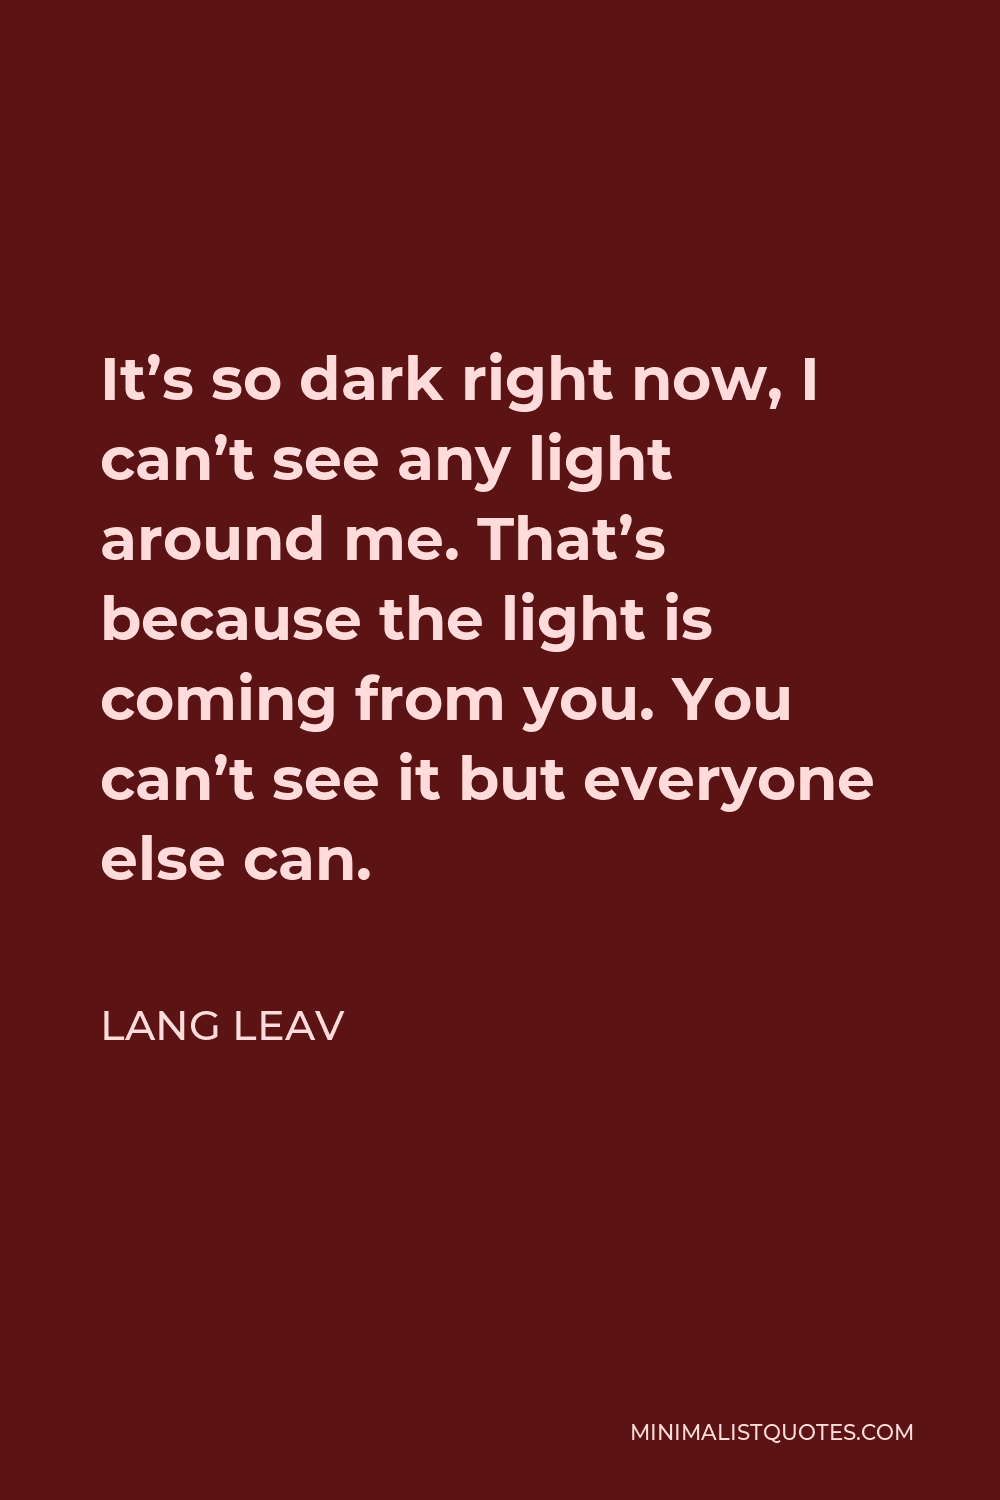 Lang Leav Quote: “When words run dry, he does not try, nor do I. We are